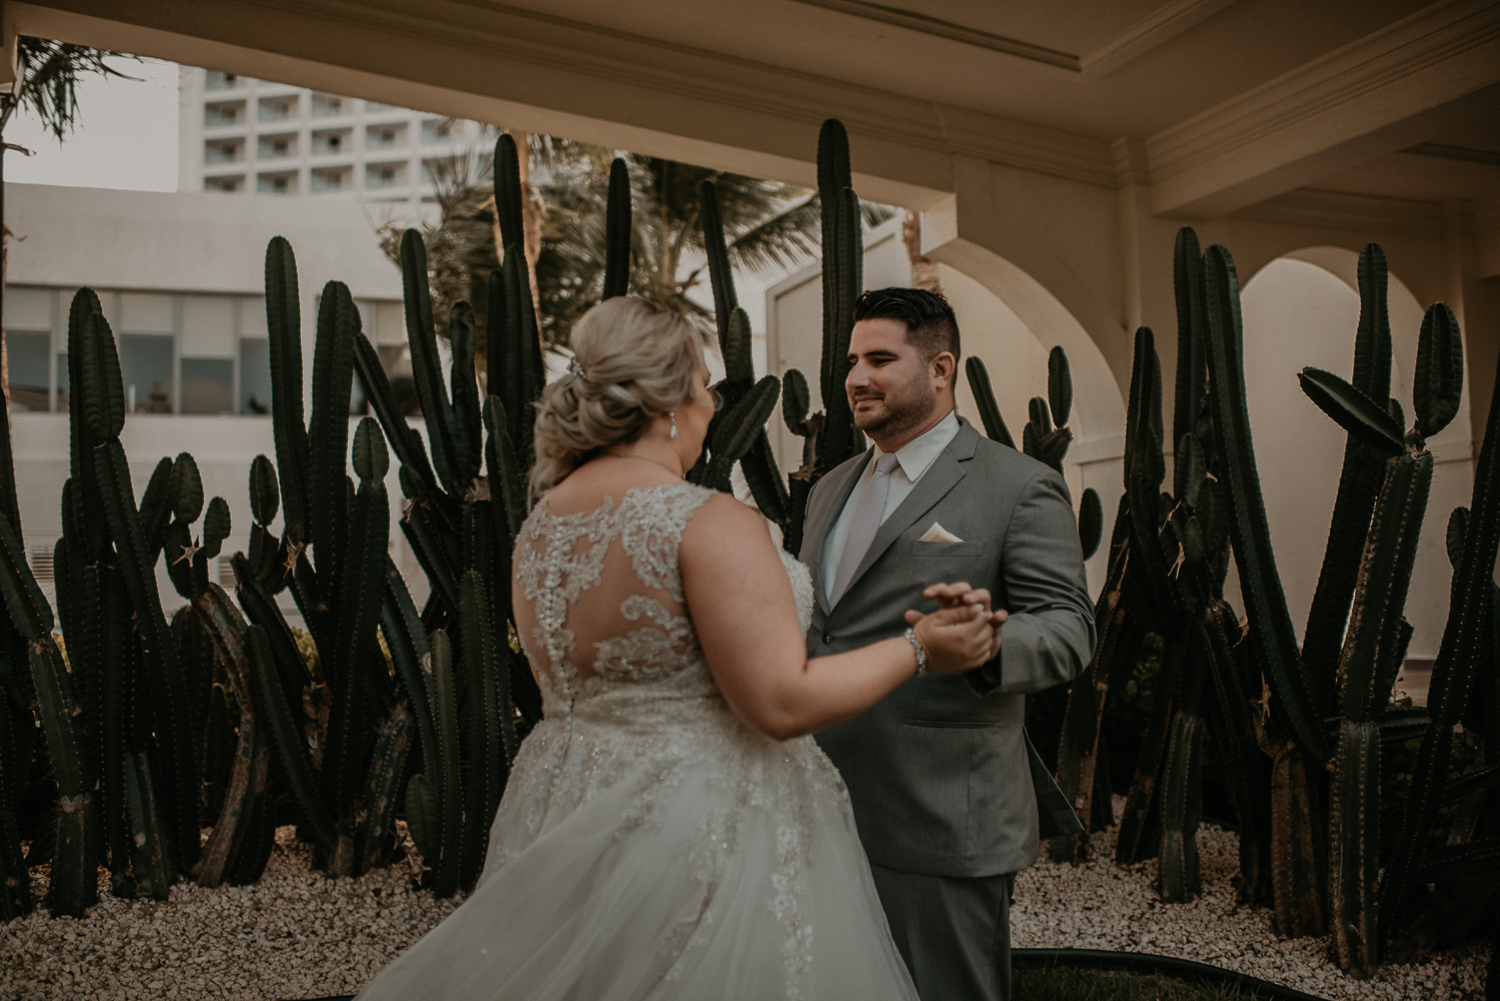 Bride and grooms first looks and private vows